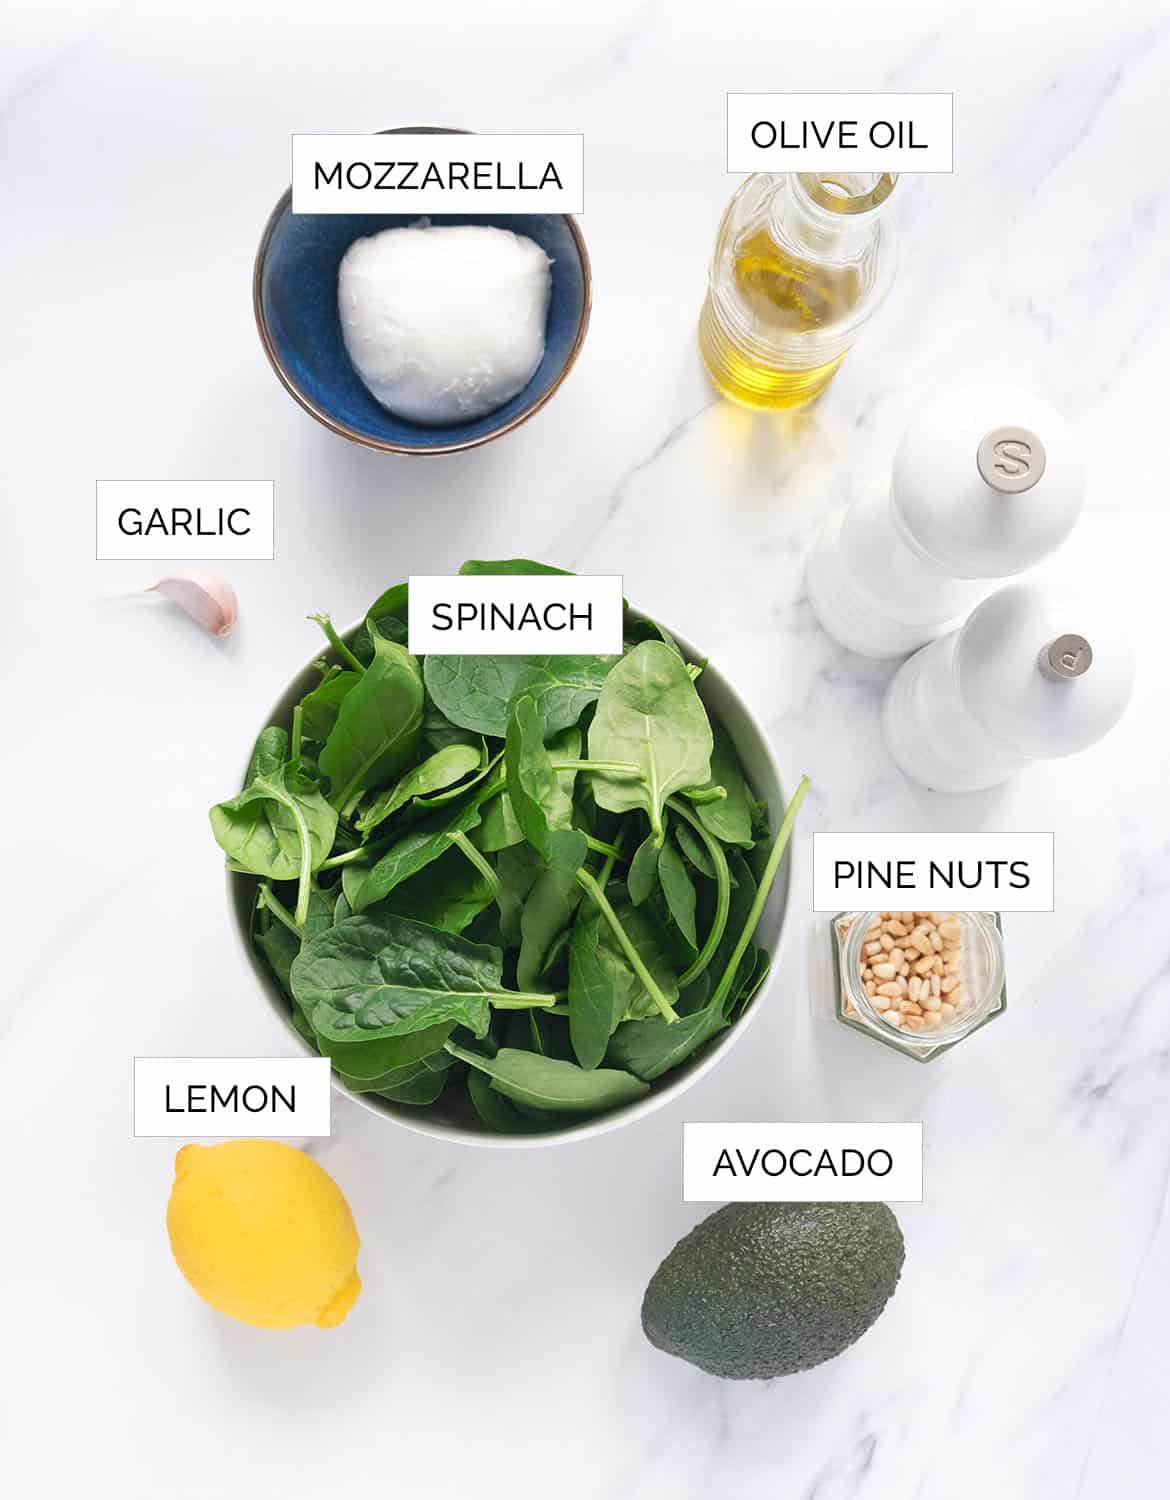 The ingredients to make this spinach avocado salad with fresh mozzarella are arranged over a white background.